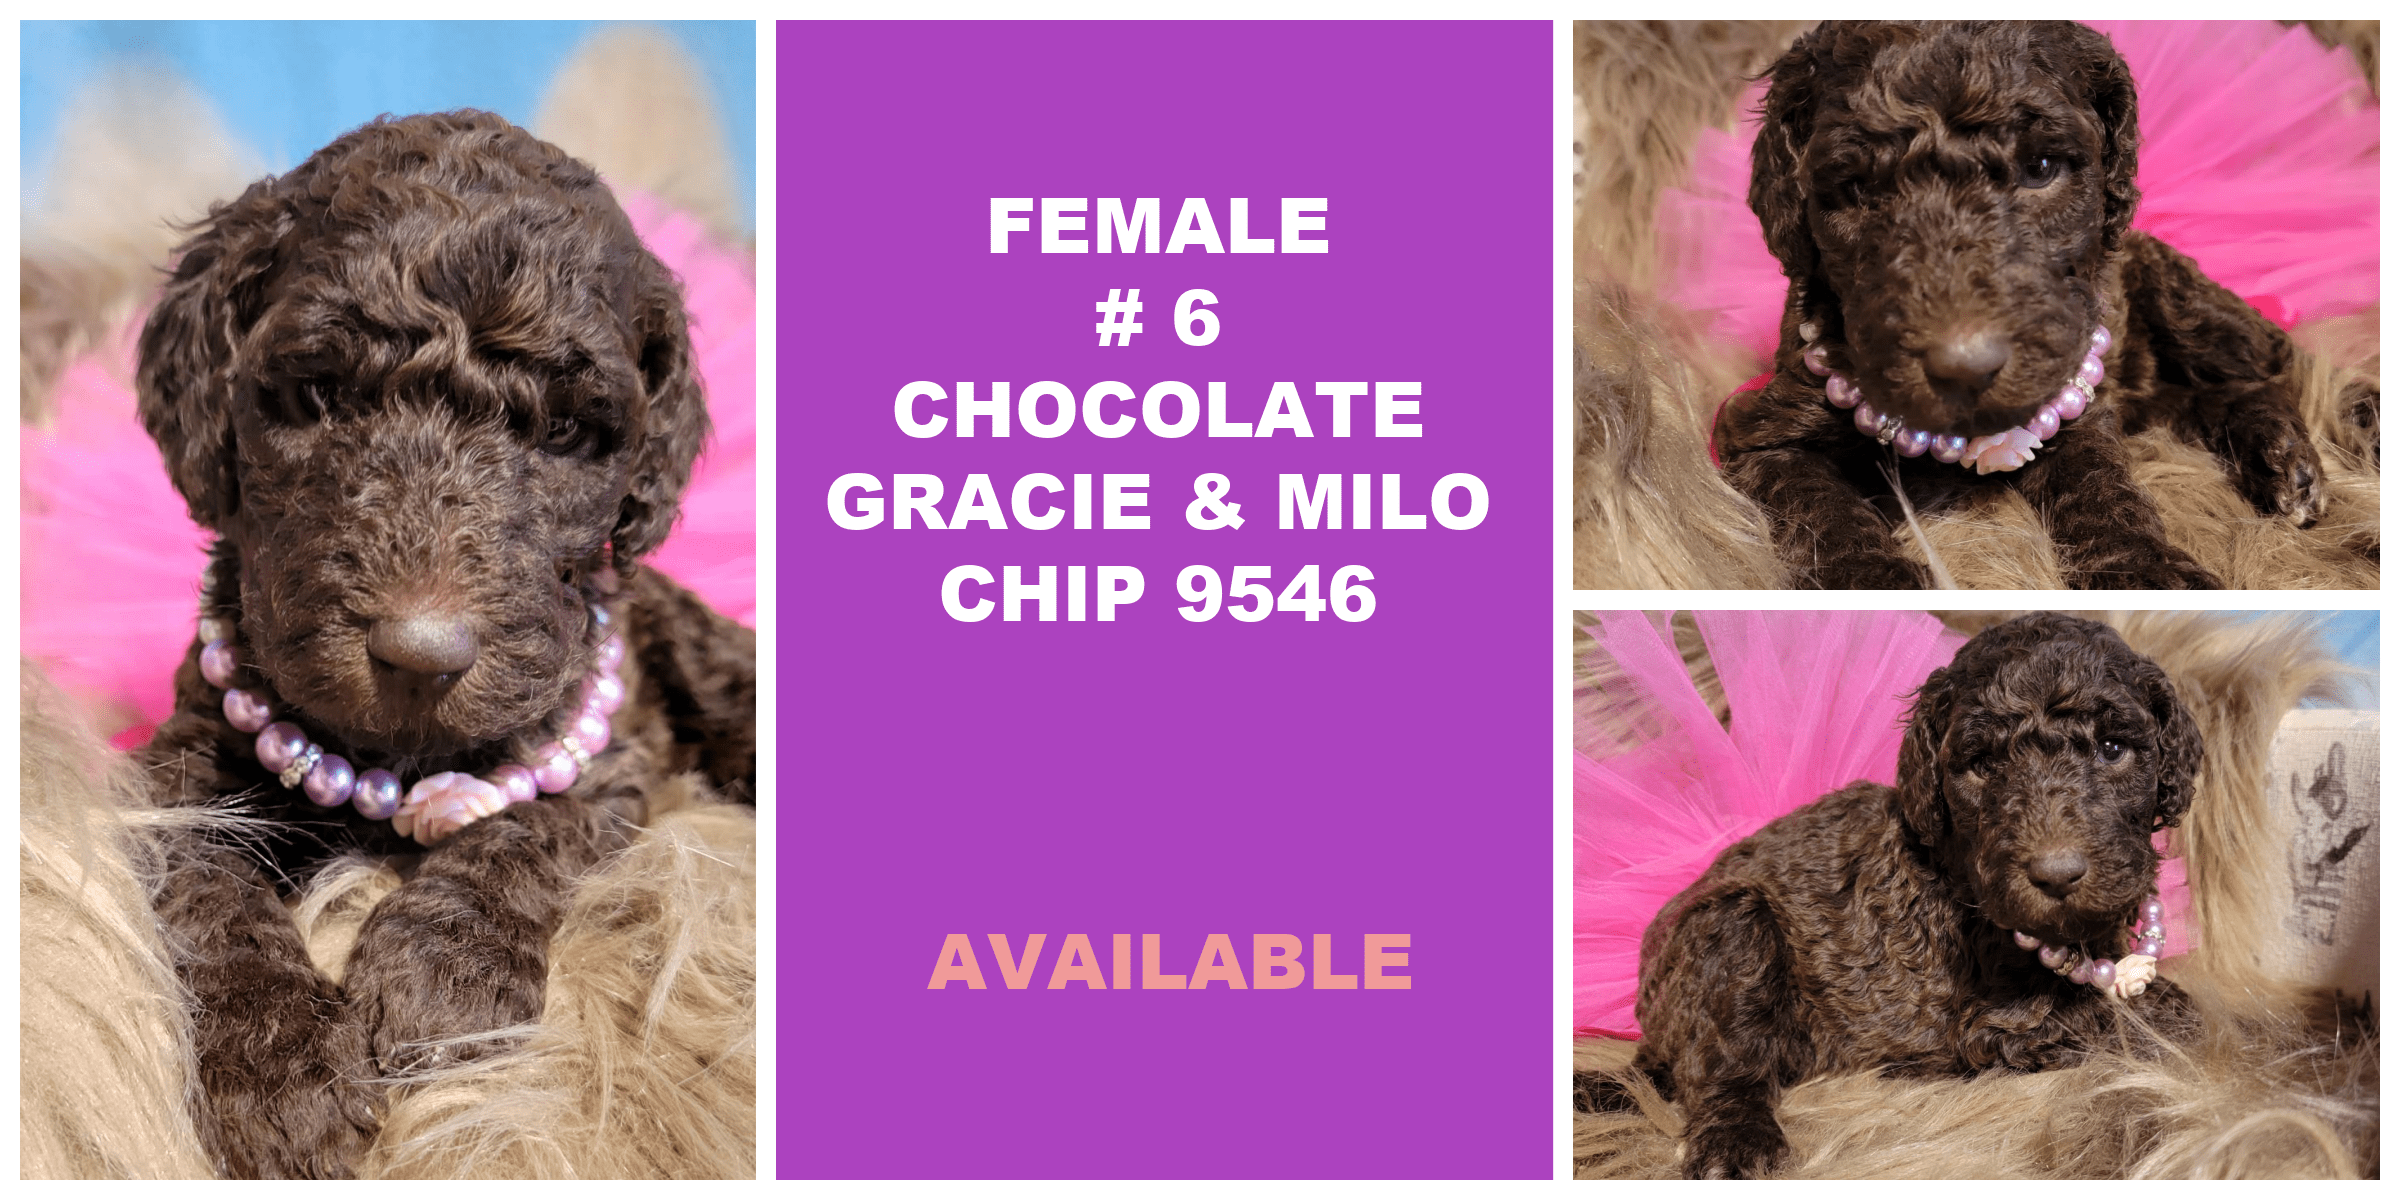 FEMALE 6 CHOCOLATE GRACIE MILO CHIP 9546 AVAILABLE